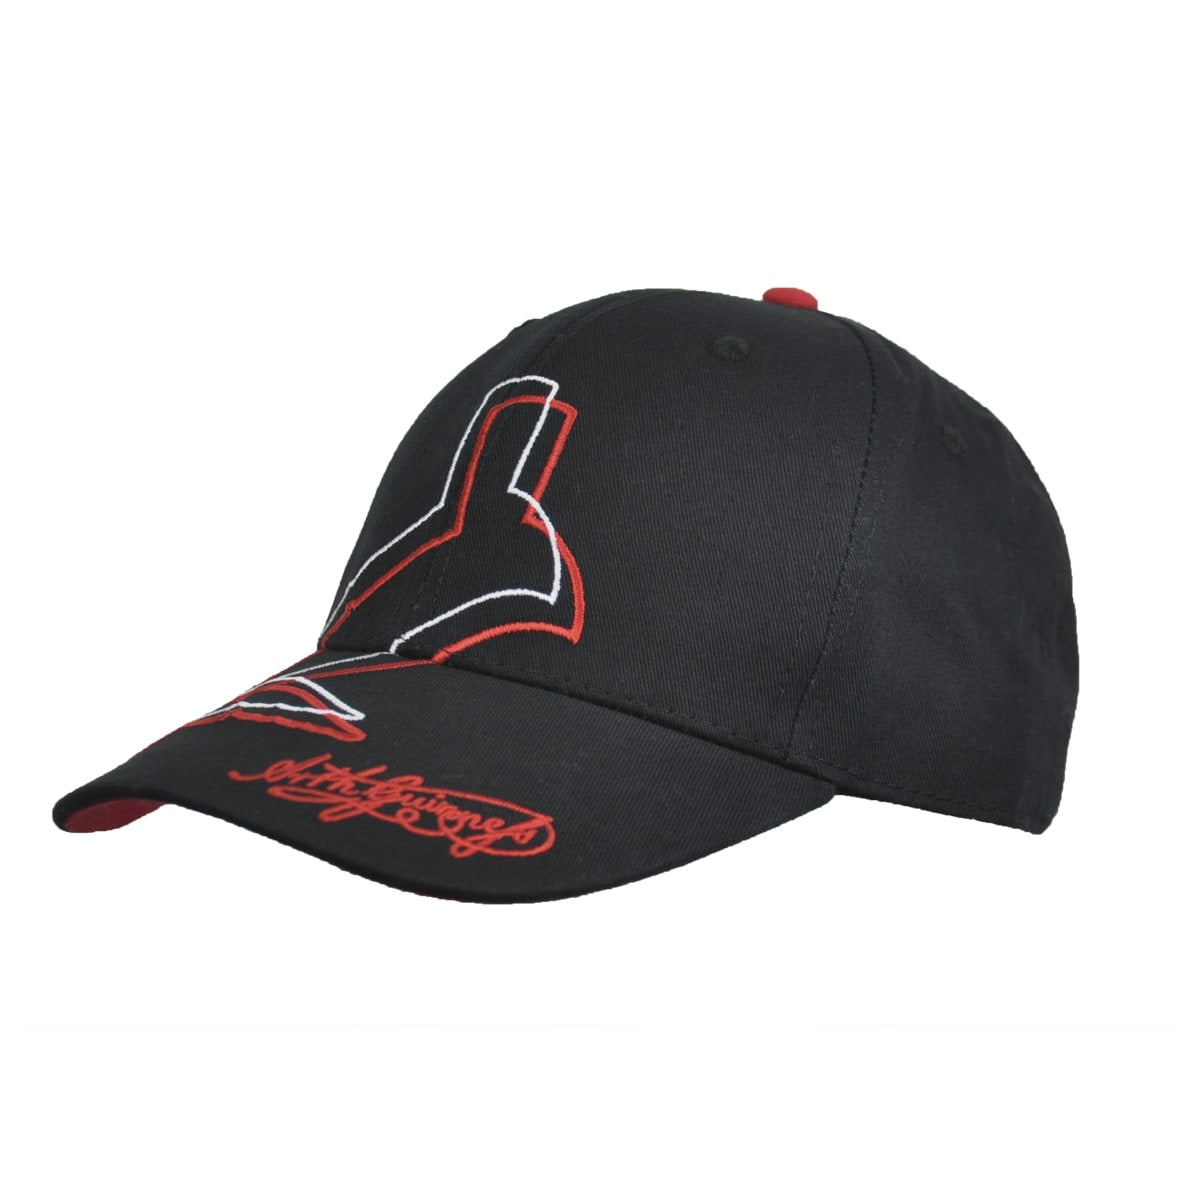 A cotton Red Toucan Baseball Cap in black and red with a Guinness UK logo on it.